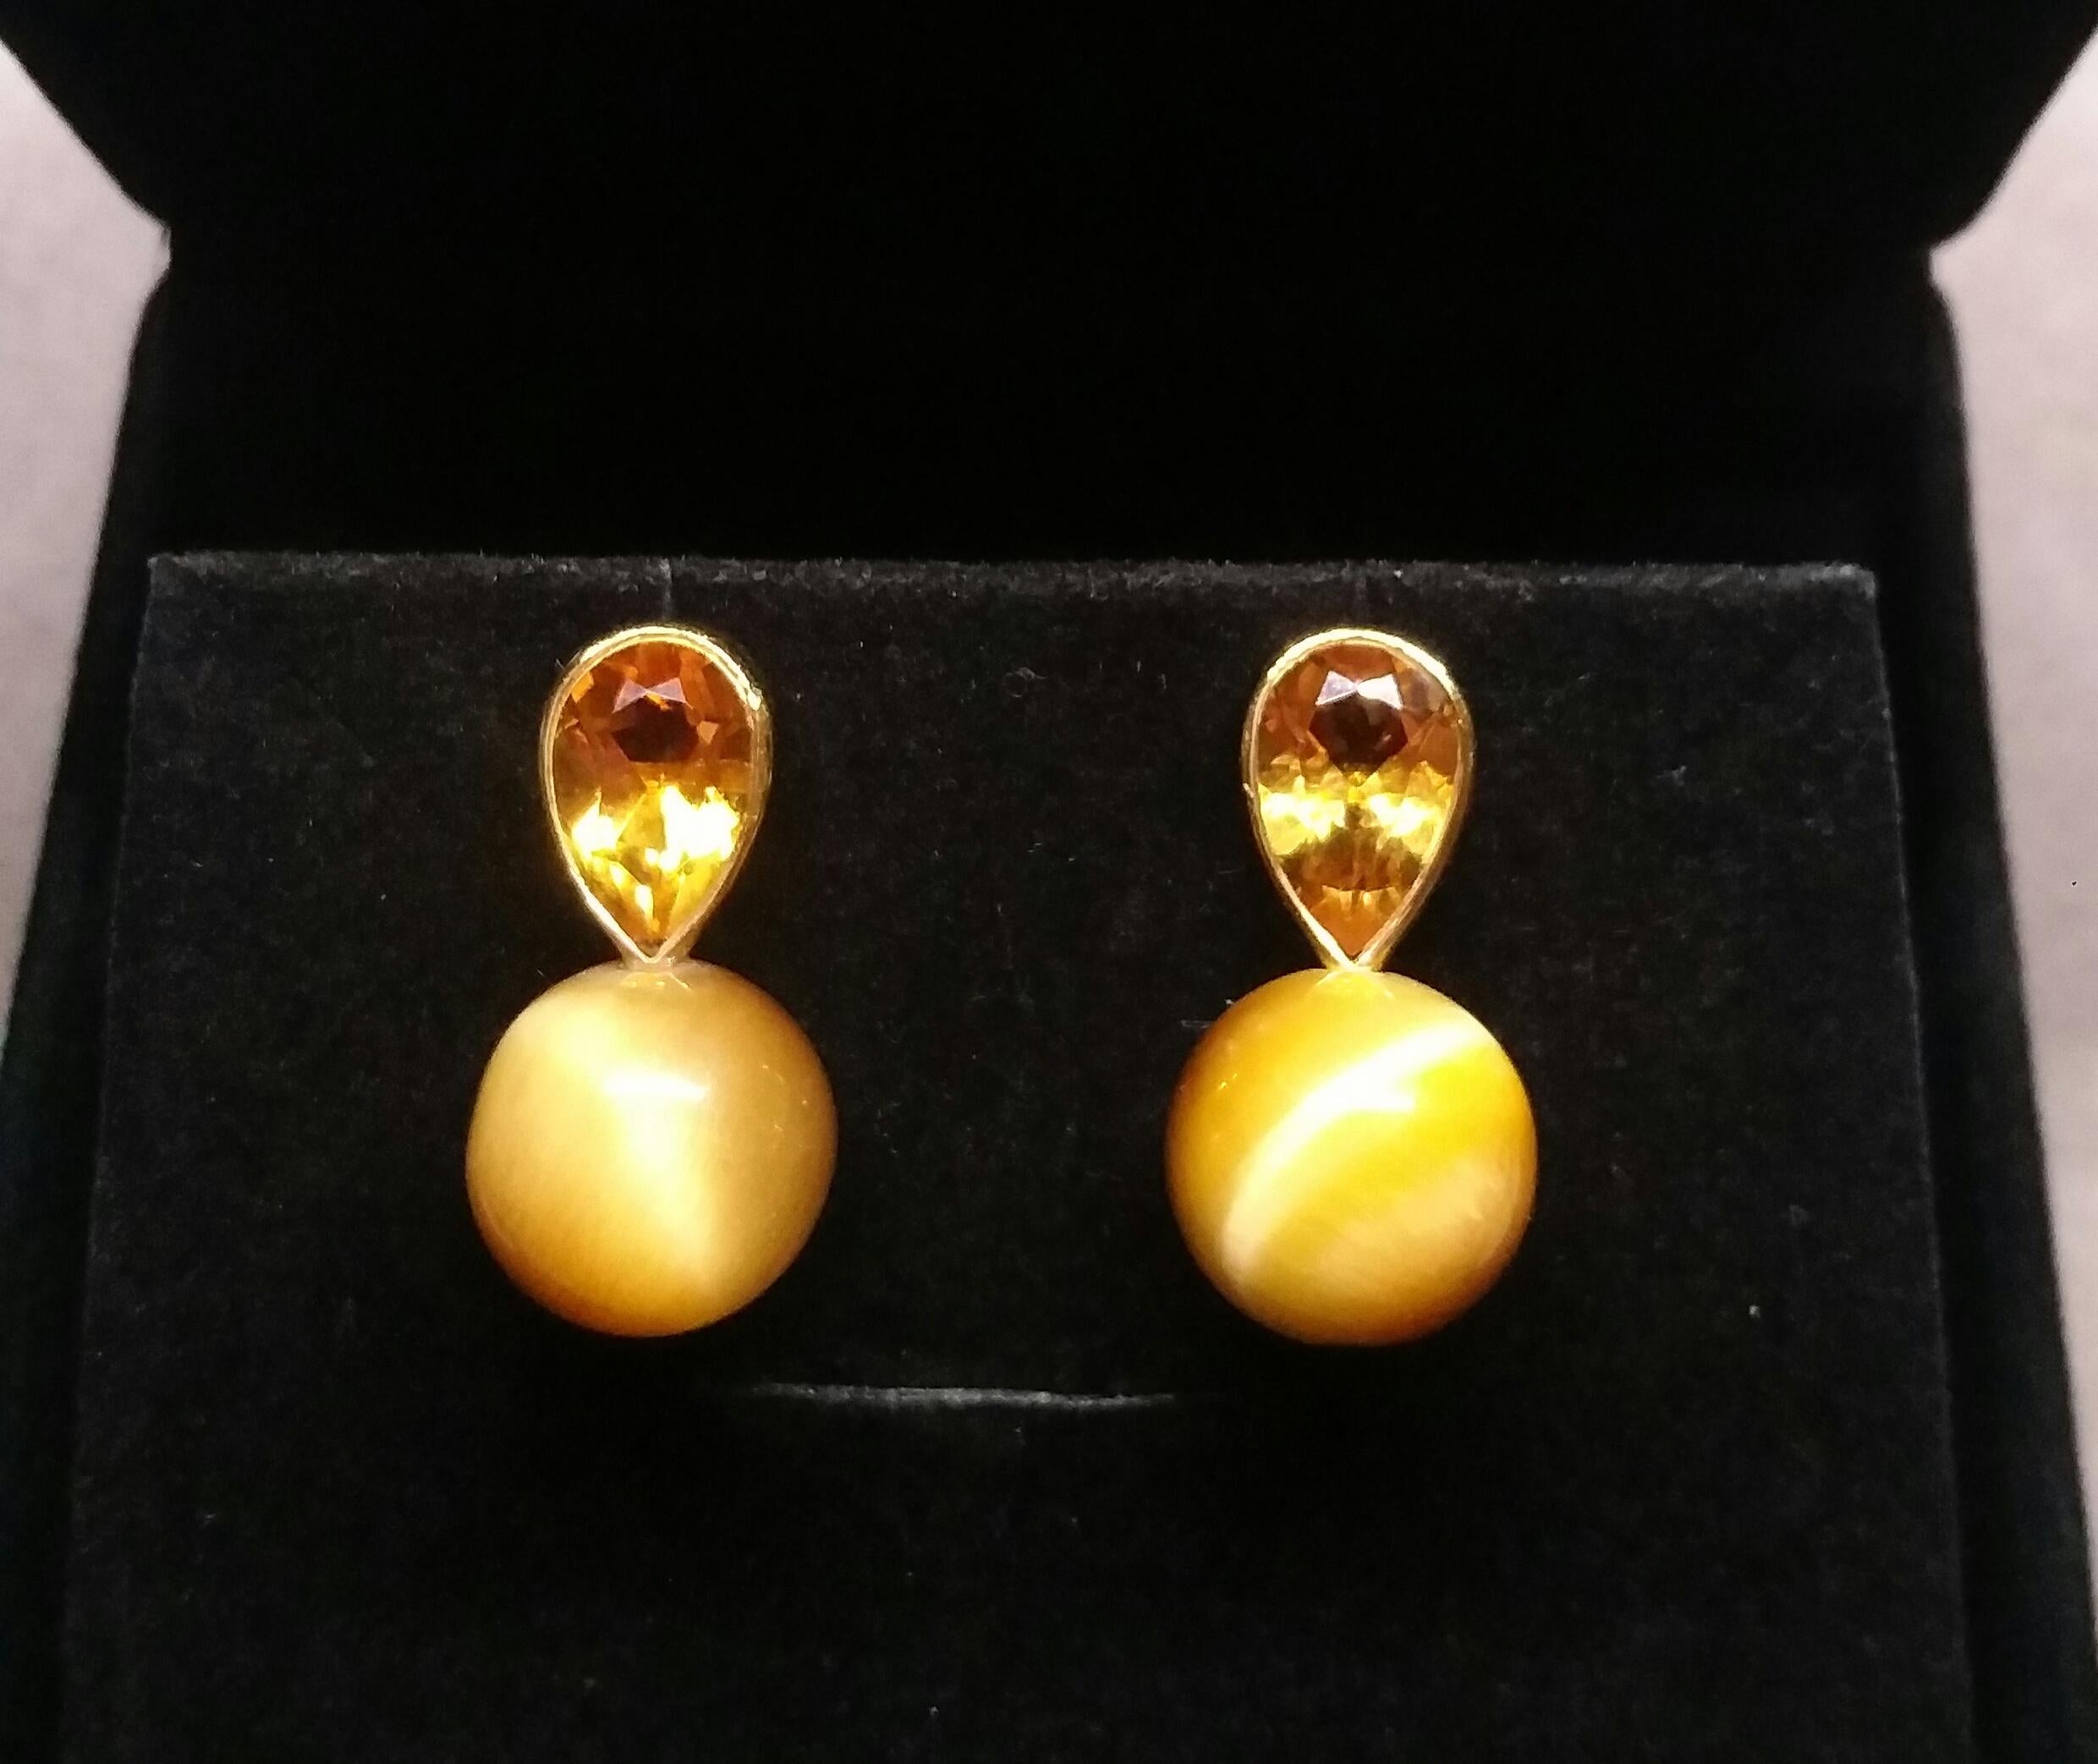 These simple but elegant and completely handmade earrings have 2 Pear Shape Faceted  Natural Citrines measuring 7 x 12 mm set in yellow gold bezel at the top to which are suspended 2  Golden Tiger Eye Round Beads of 14 mm in diameter

In 1978 our